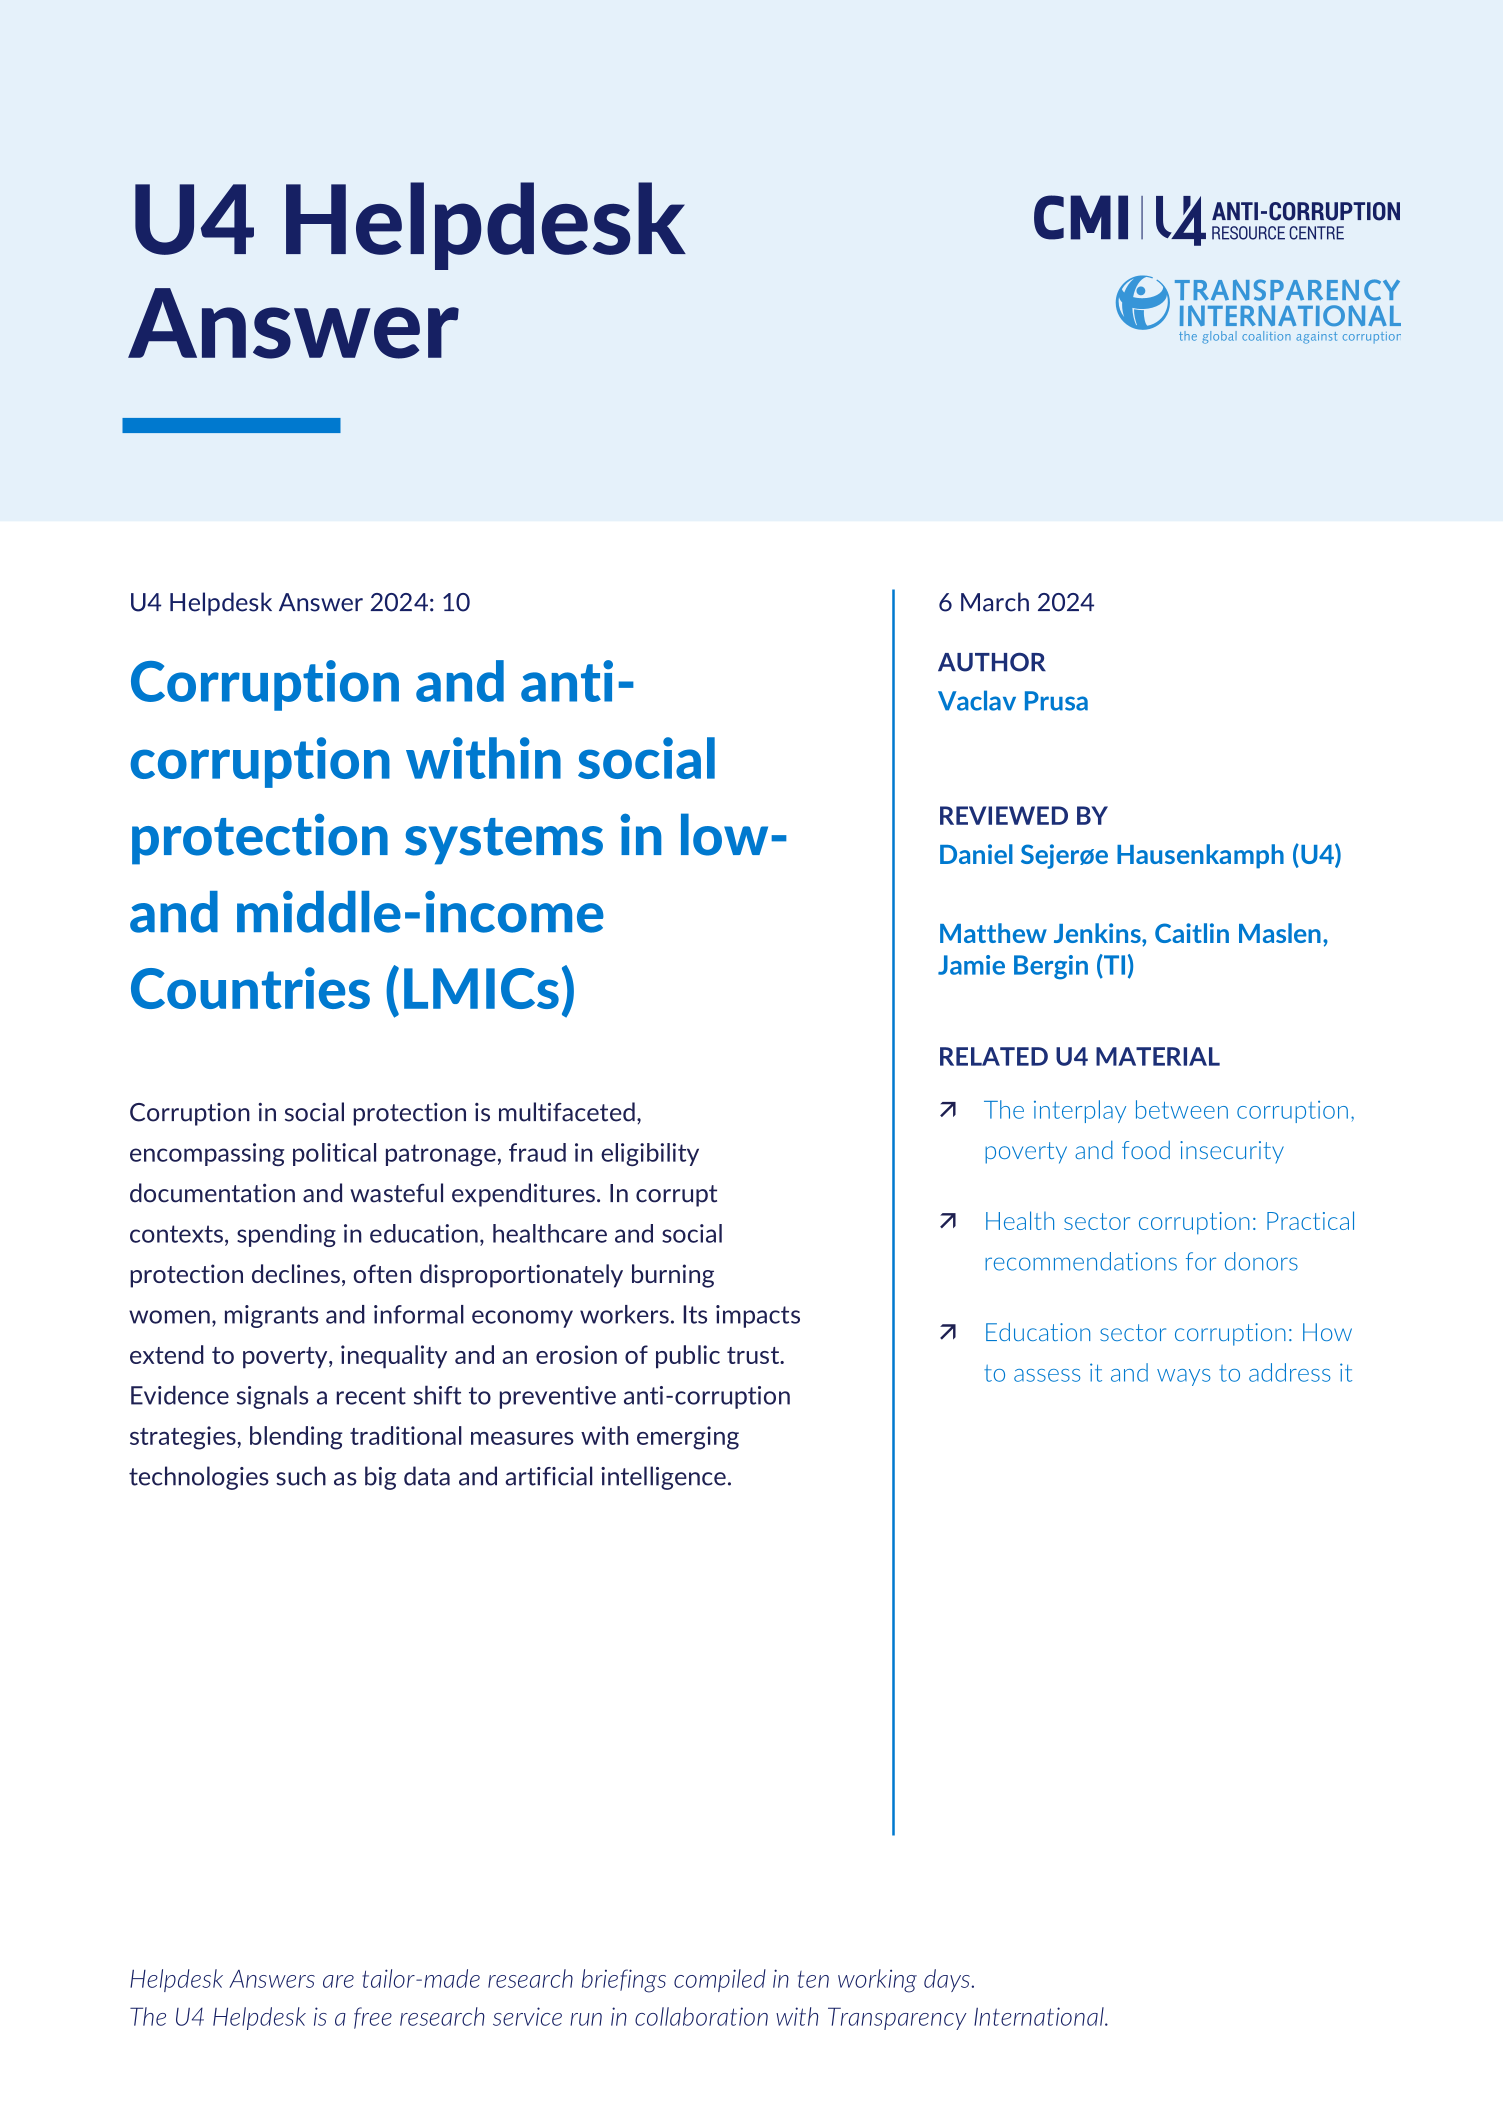 Corruption and anti-corruption within social protection systems in low- and middle-income countries (LMICs)